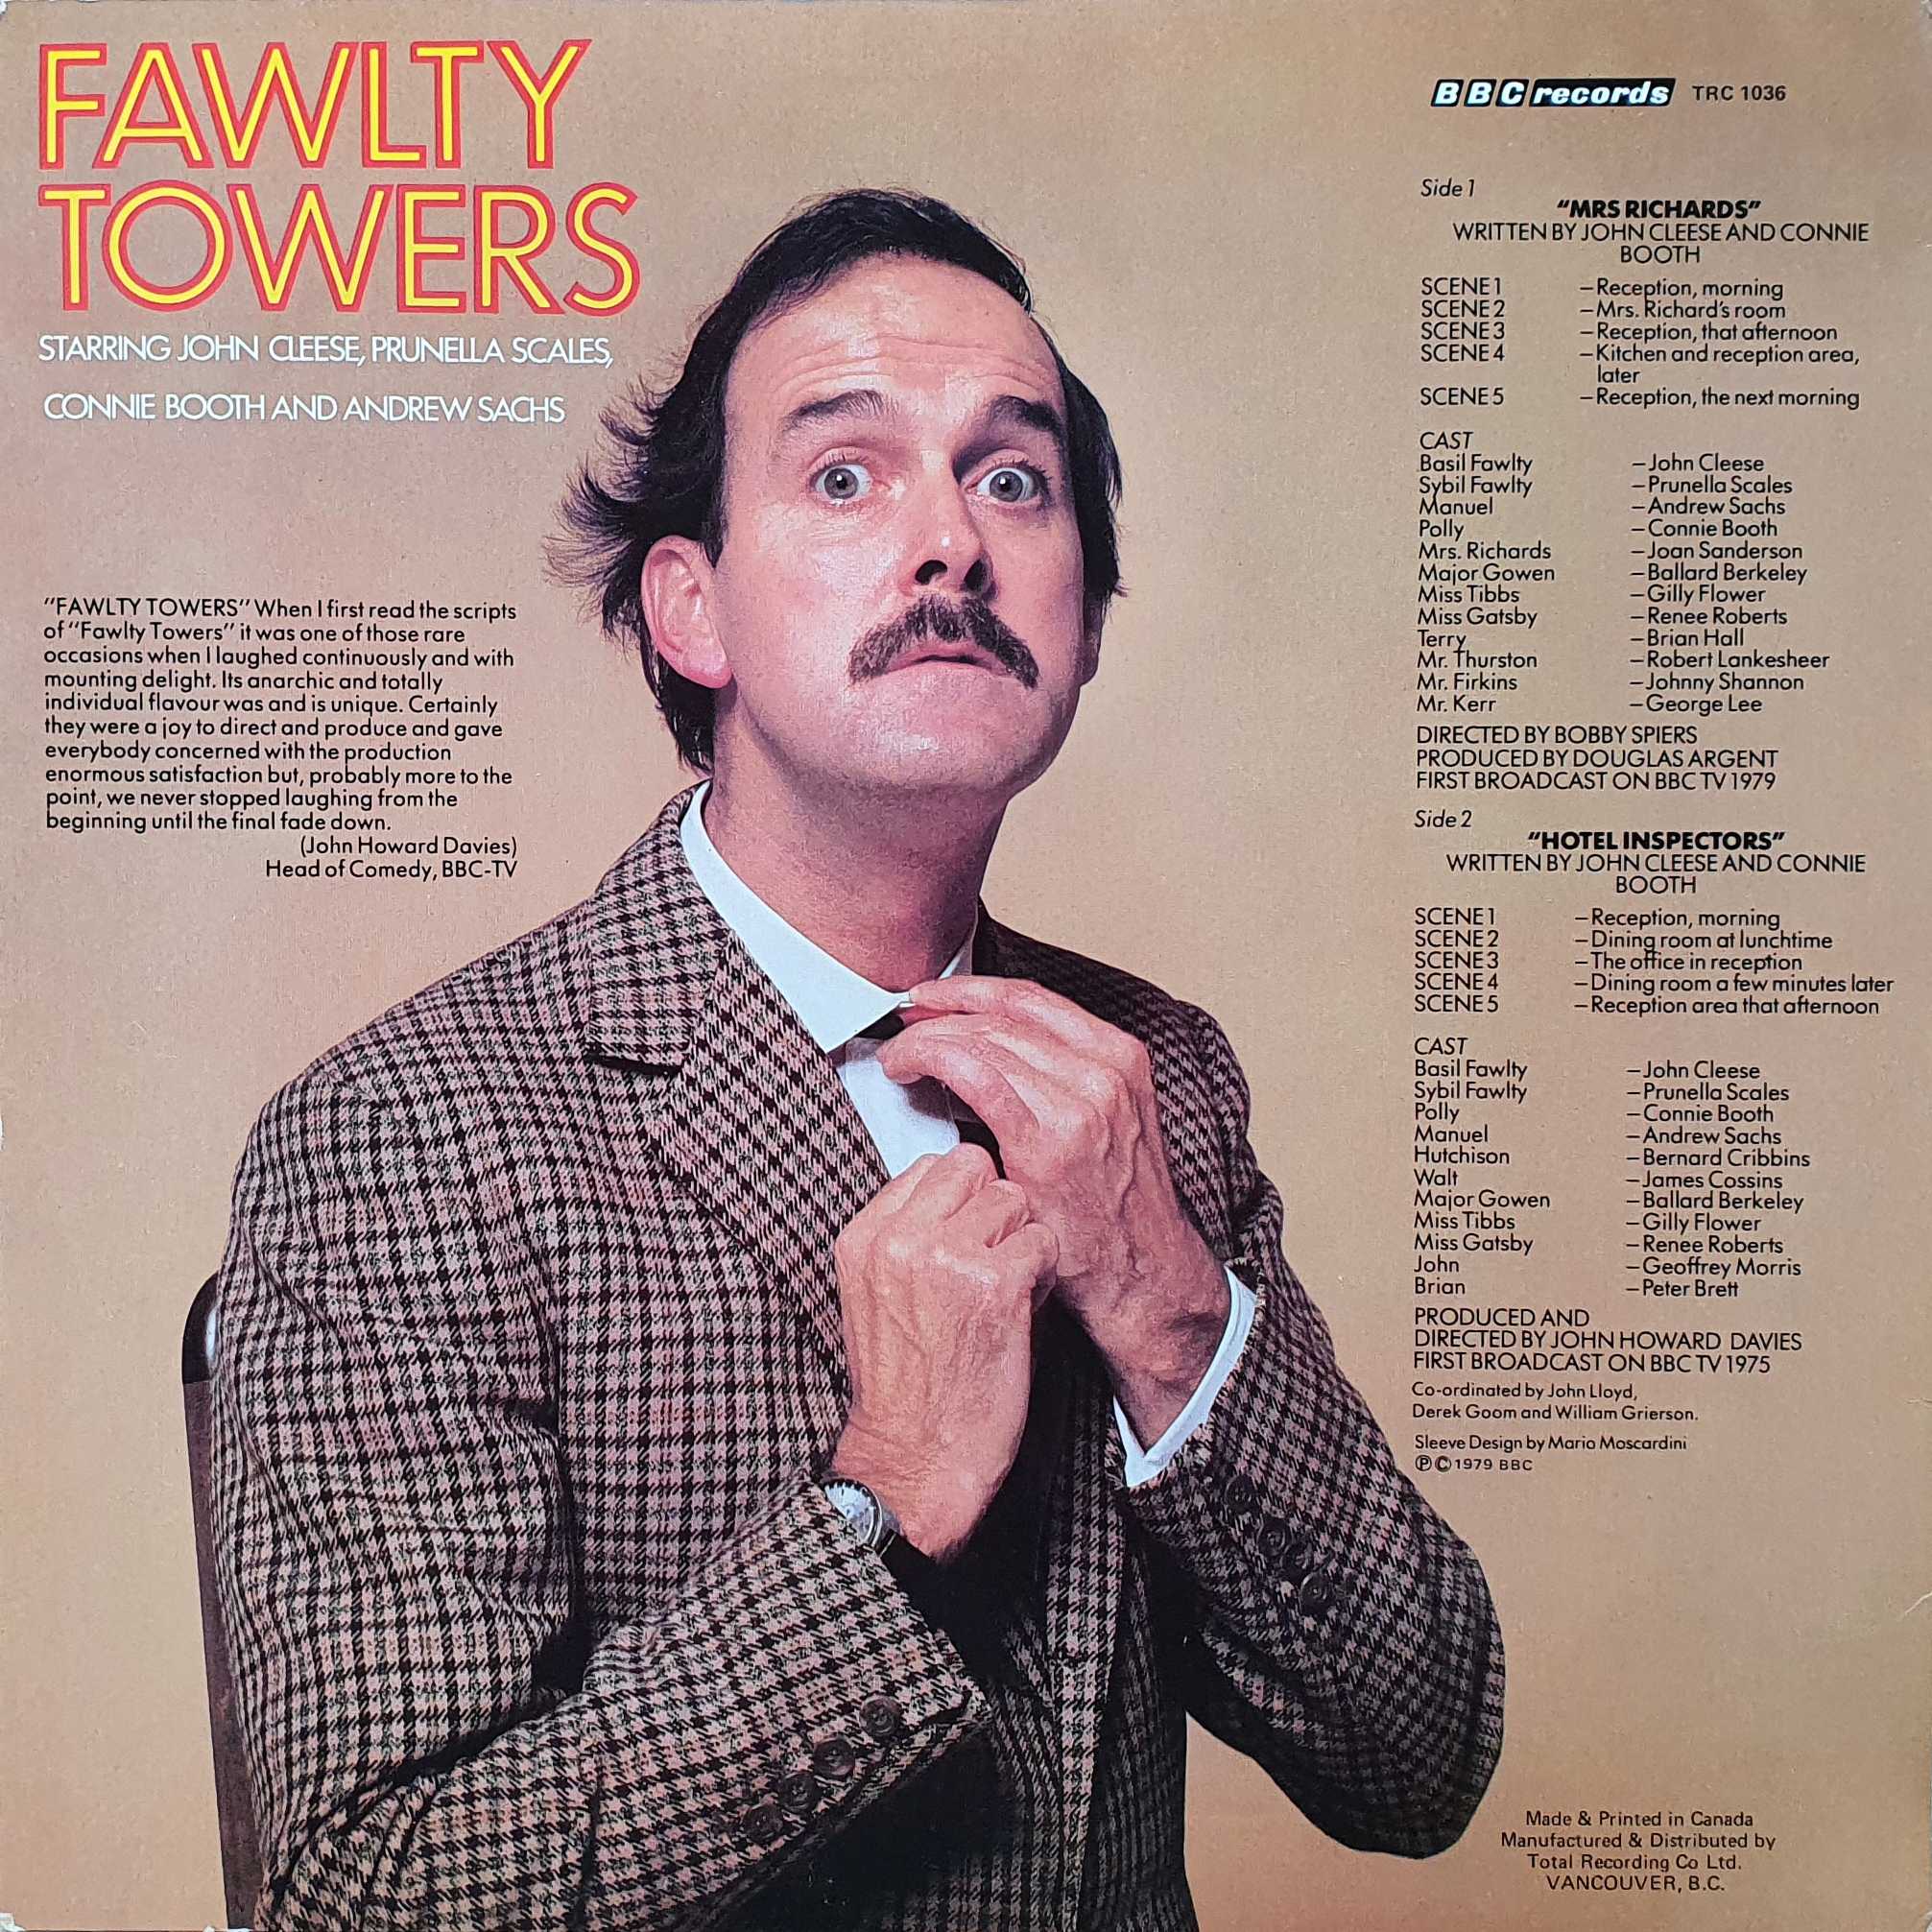 Picture of TRC - 1036 Fawlty Towers by artist John Cleese / Connie Booth from the BBC records and Tapes library